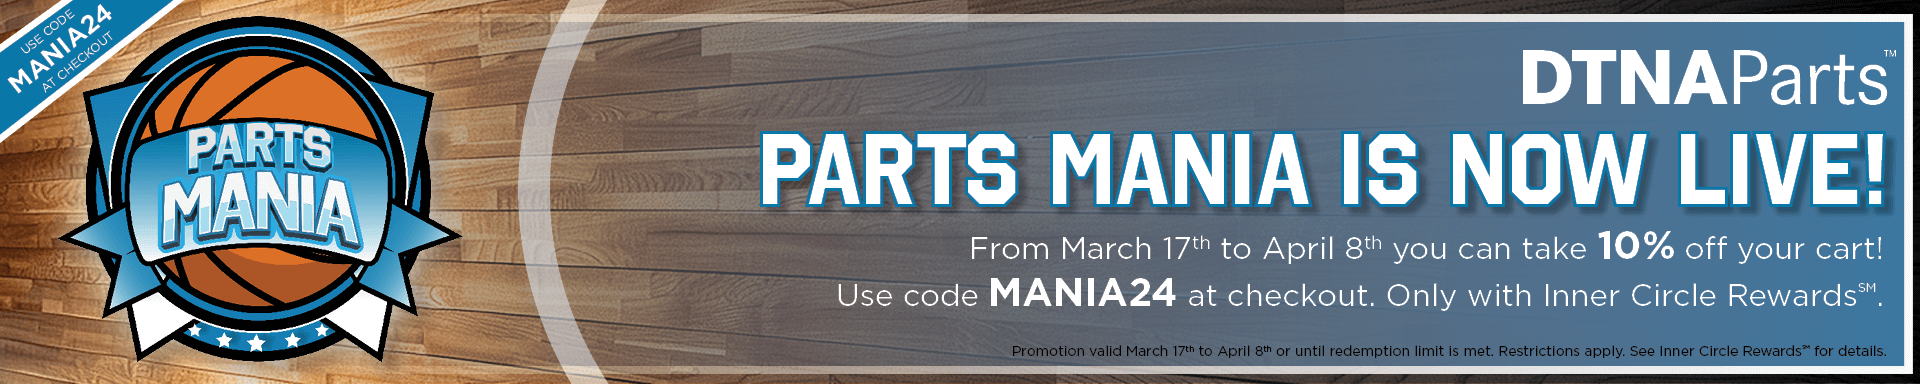 Parts Mania Now Live - Take 10% off your cart from March 17 to April 8 using code MANIA24